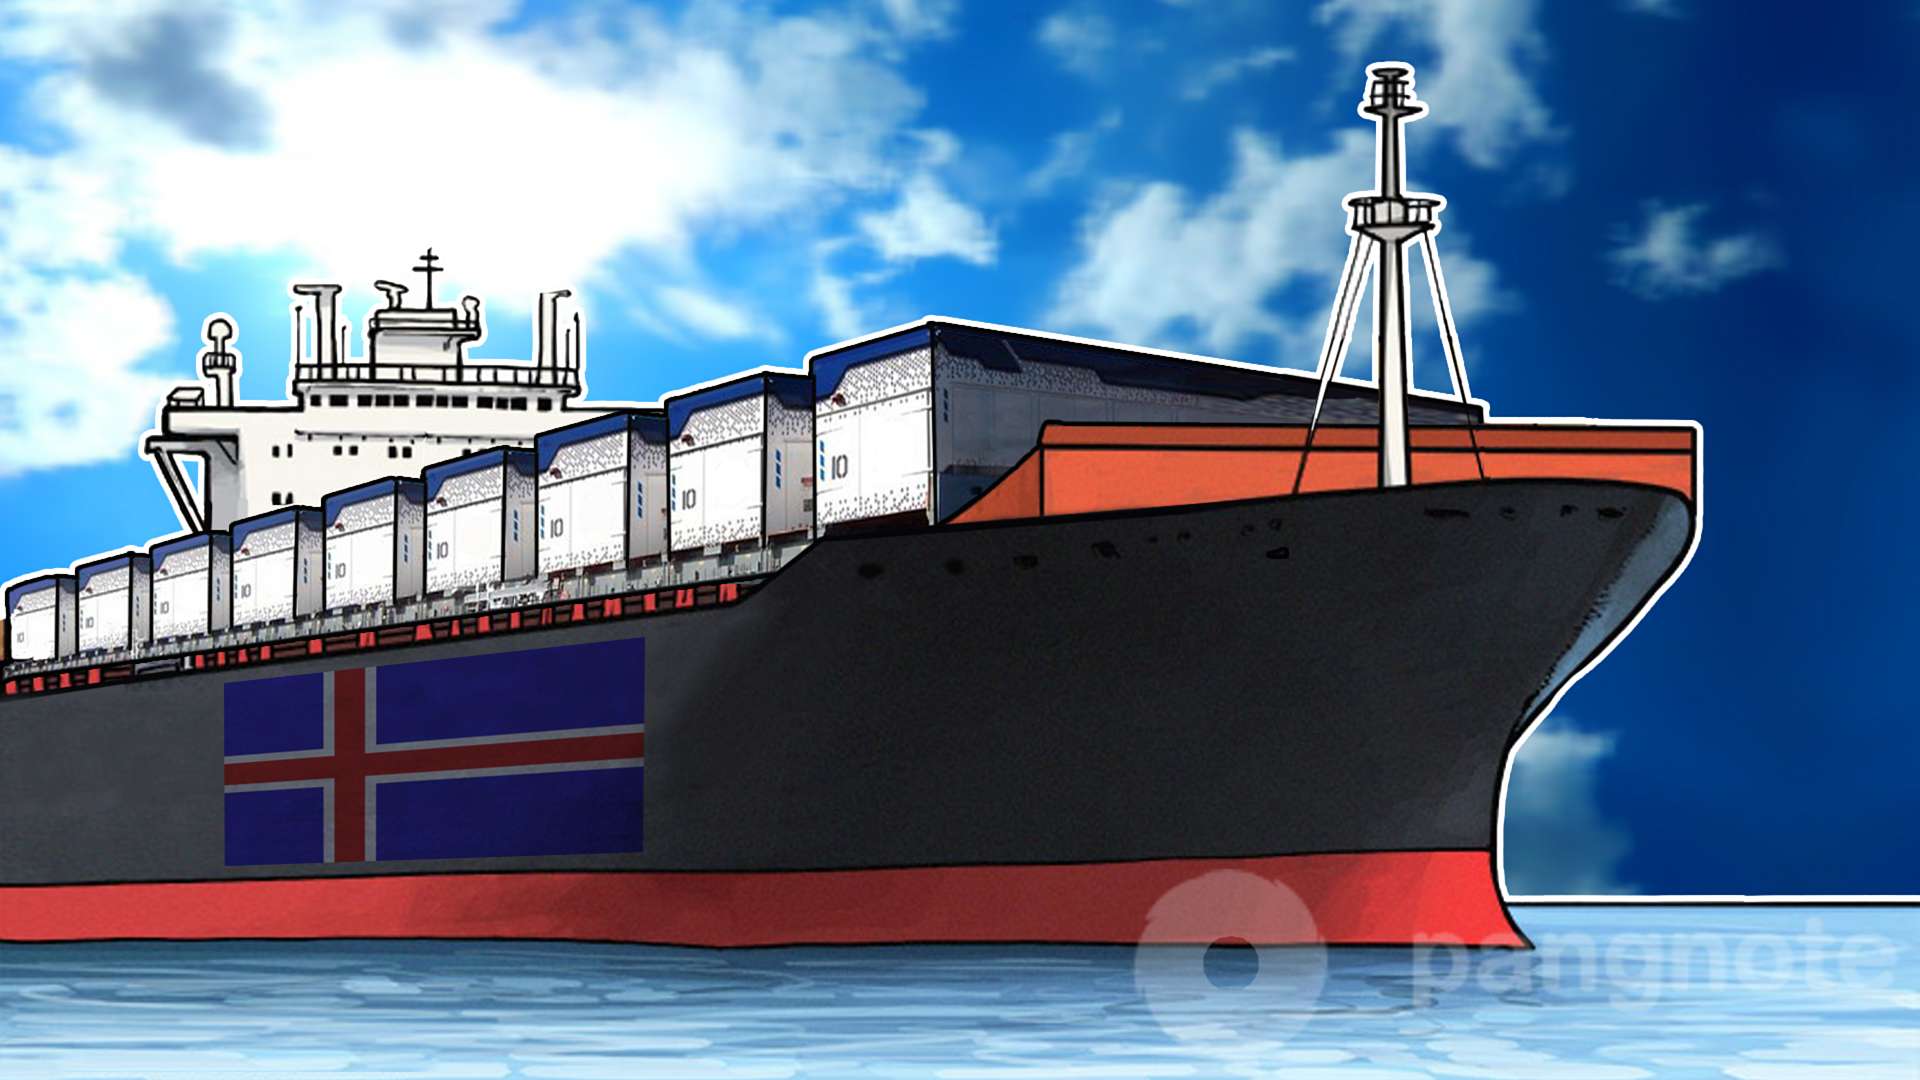 The first floating DC will be launched in Ireland